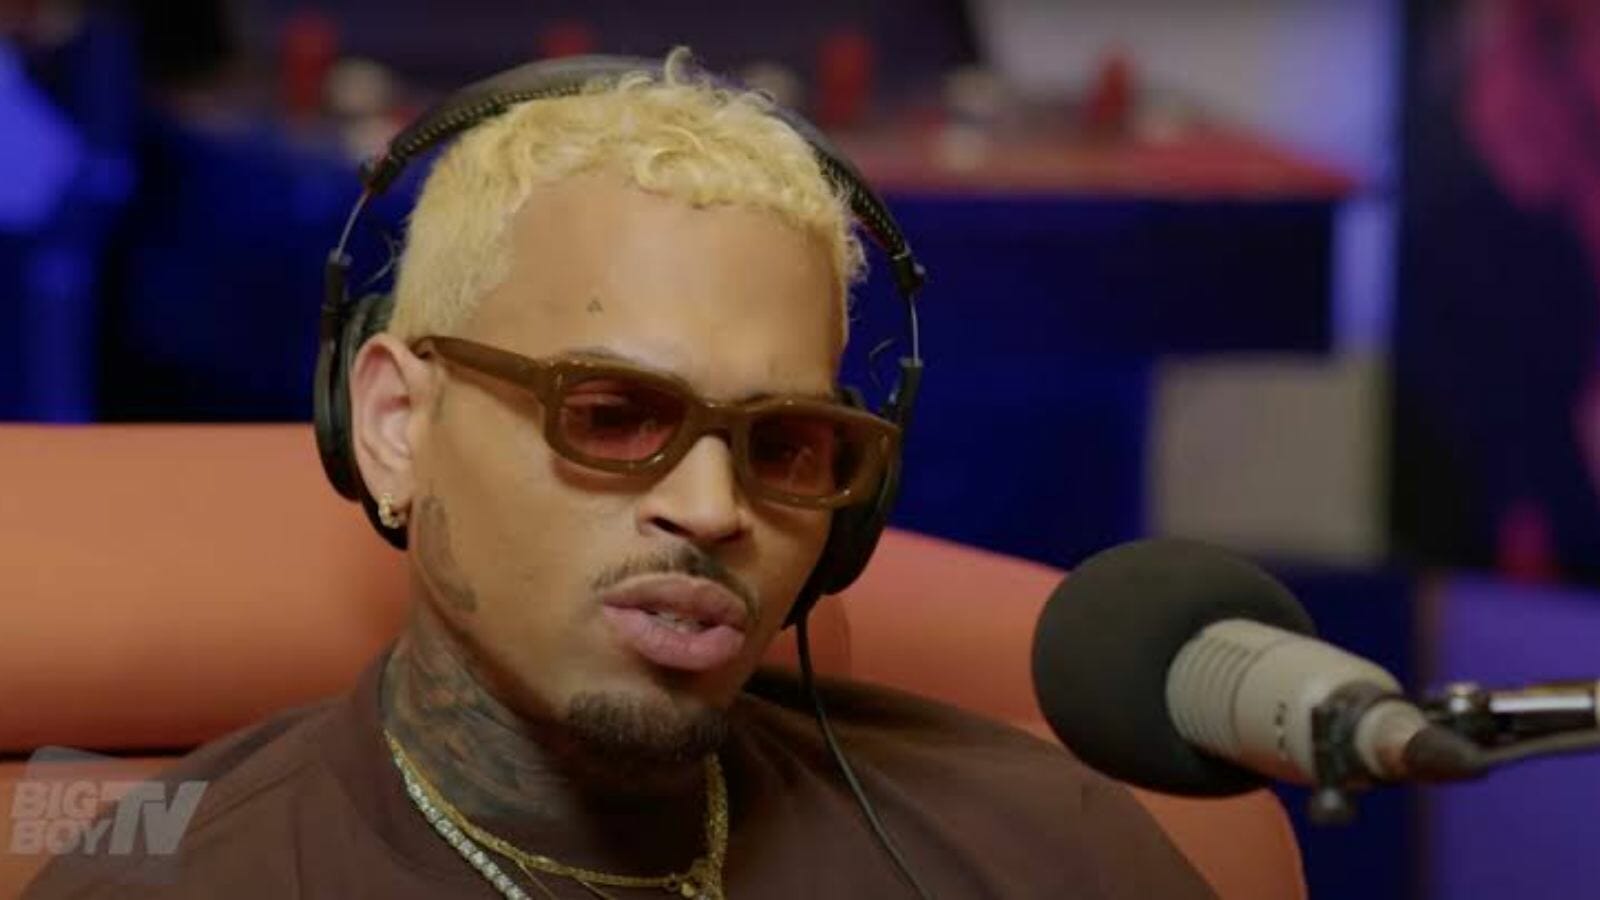 Breezy during the podcast talked about the Michael Jackson comparisons